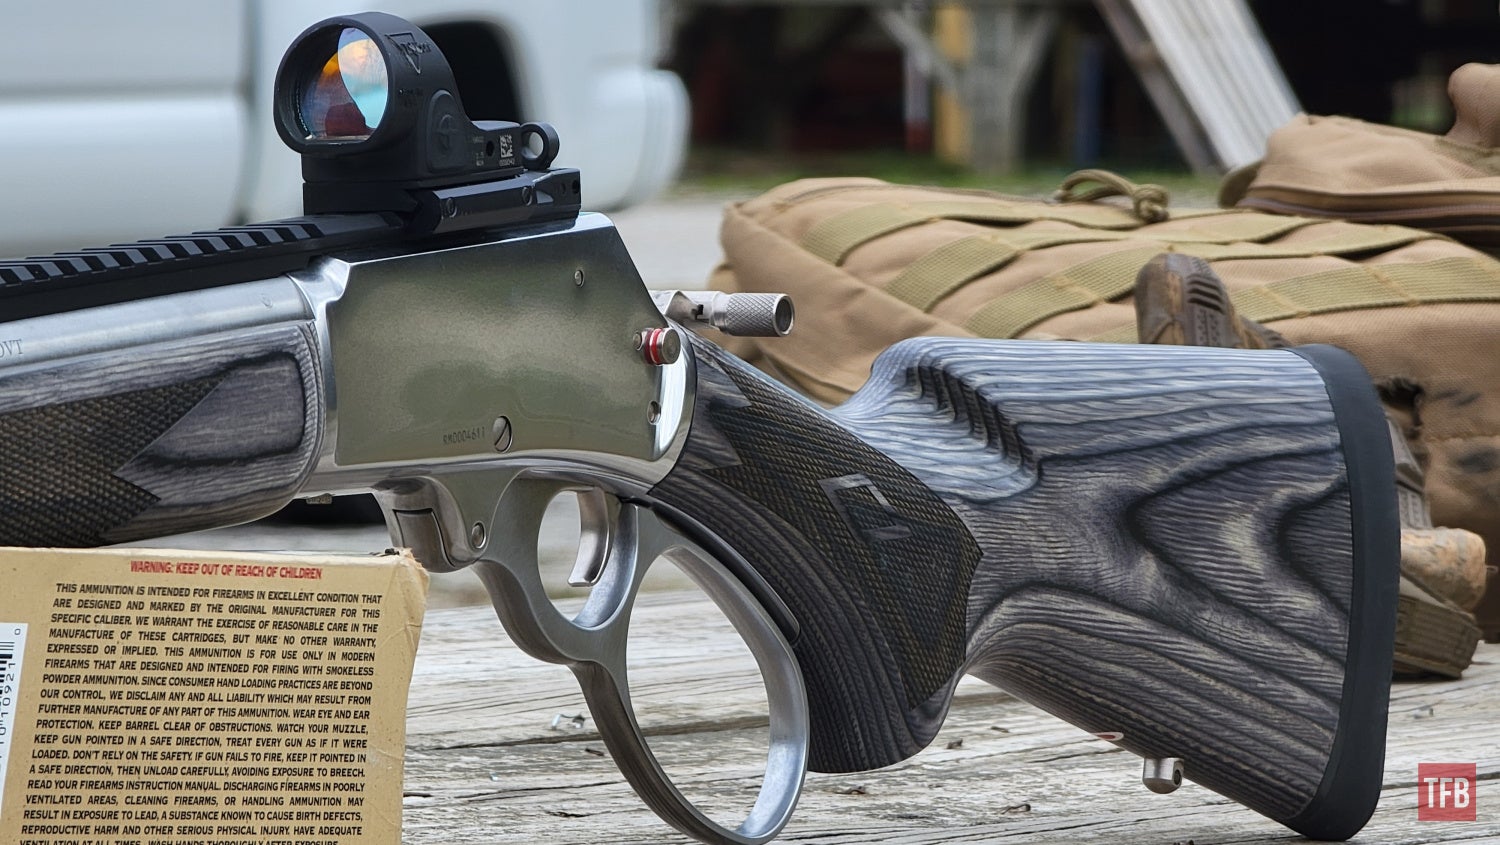 TFB Review: Is the New Ruger/Marlin 1895 SBL Done Right?